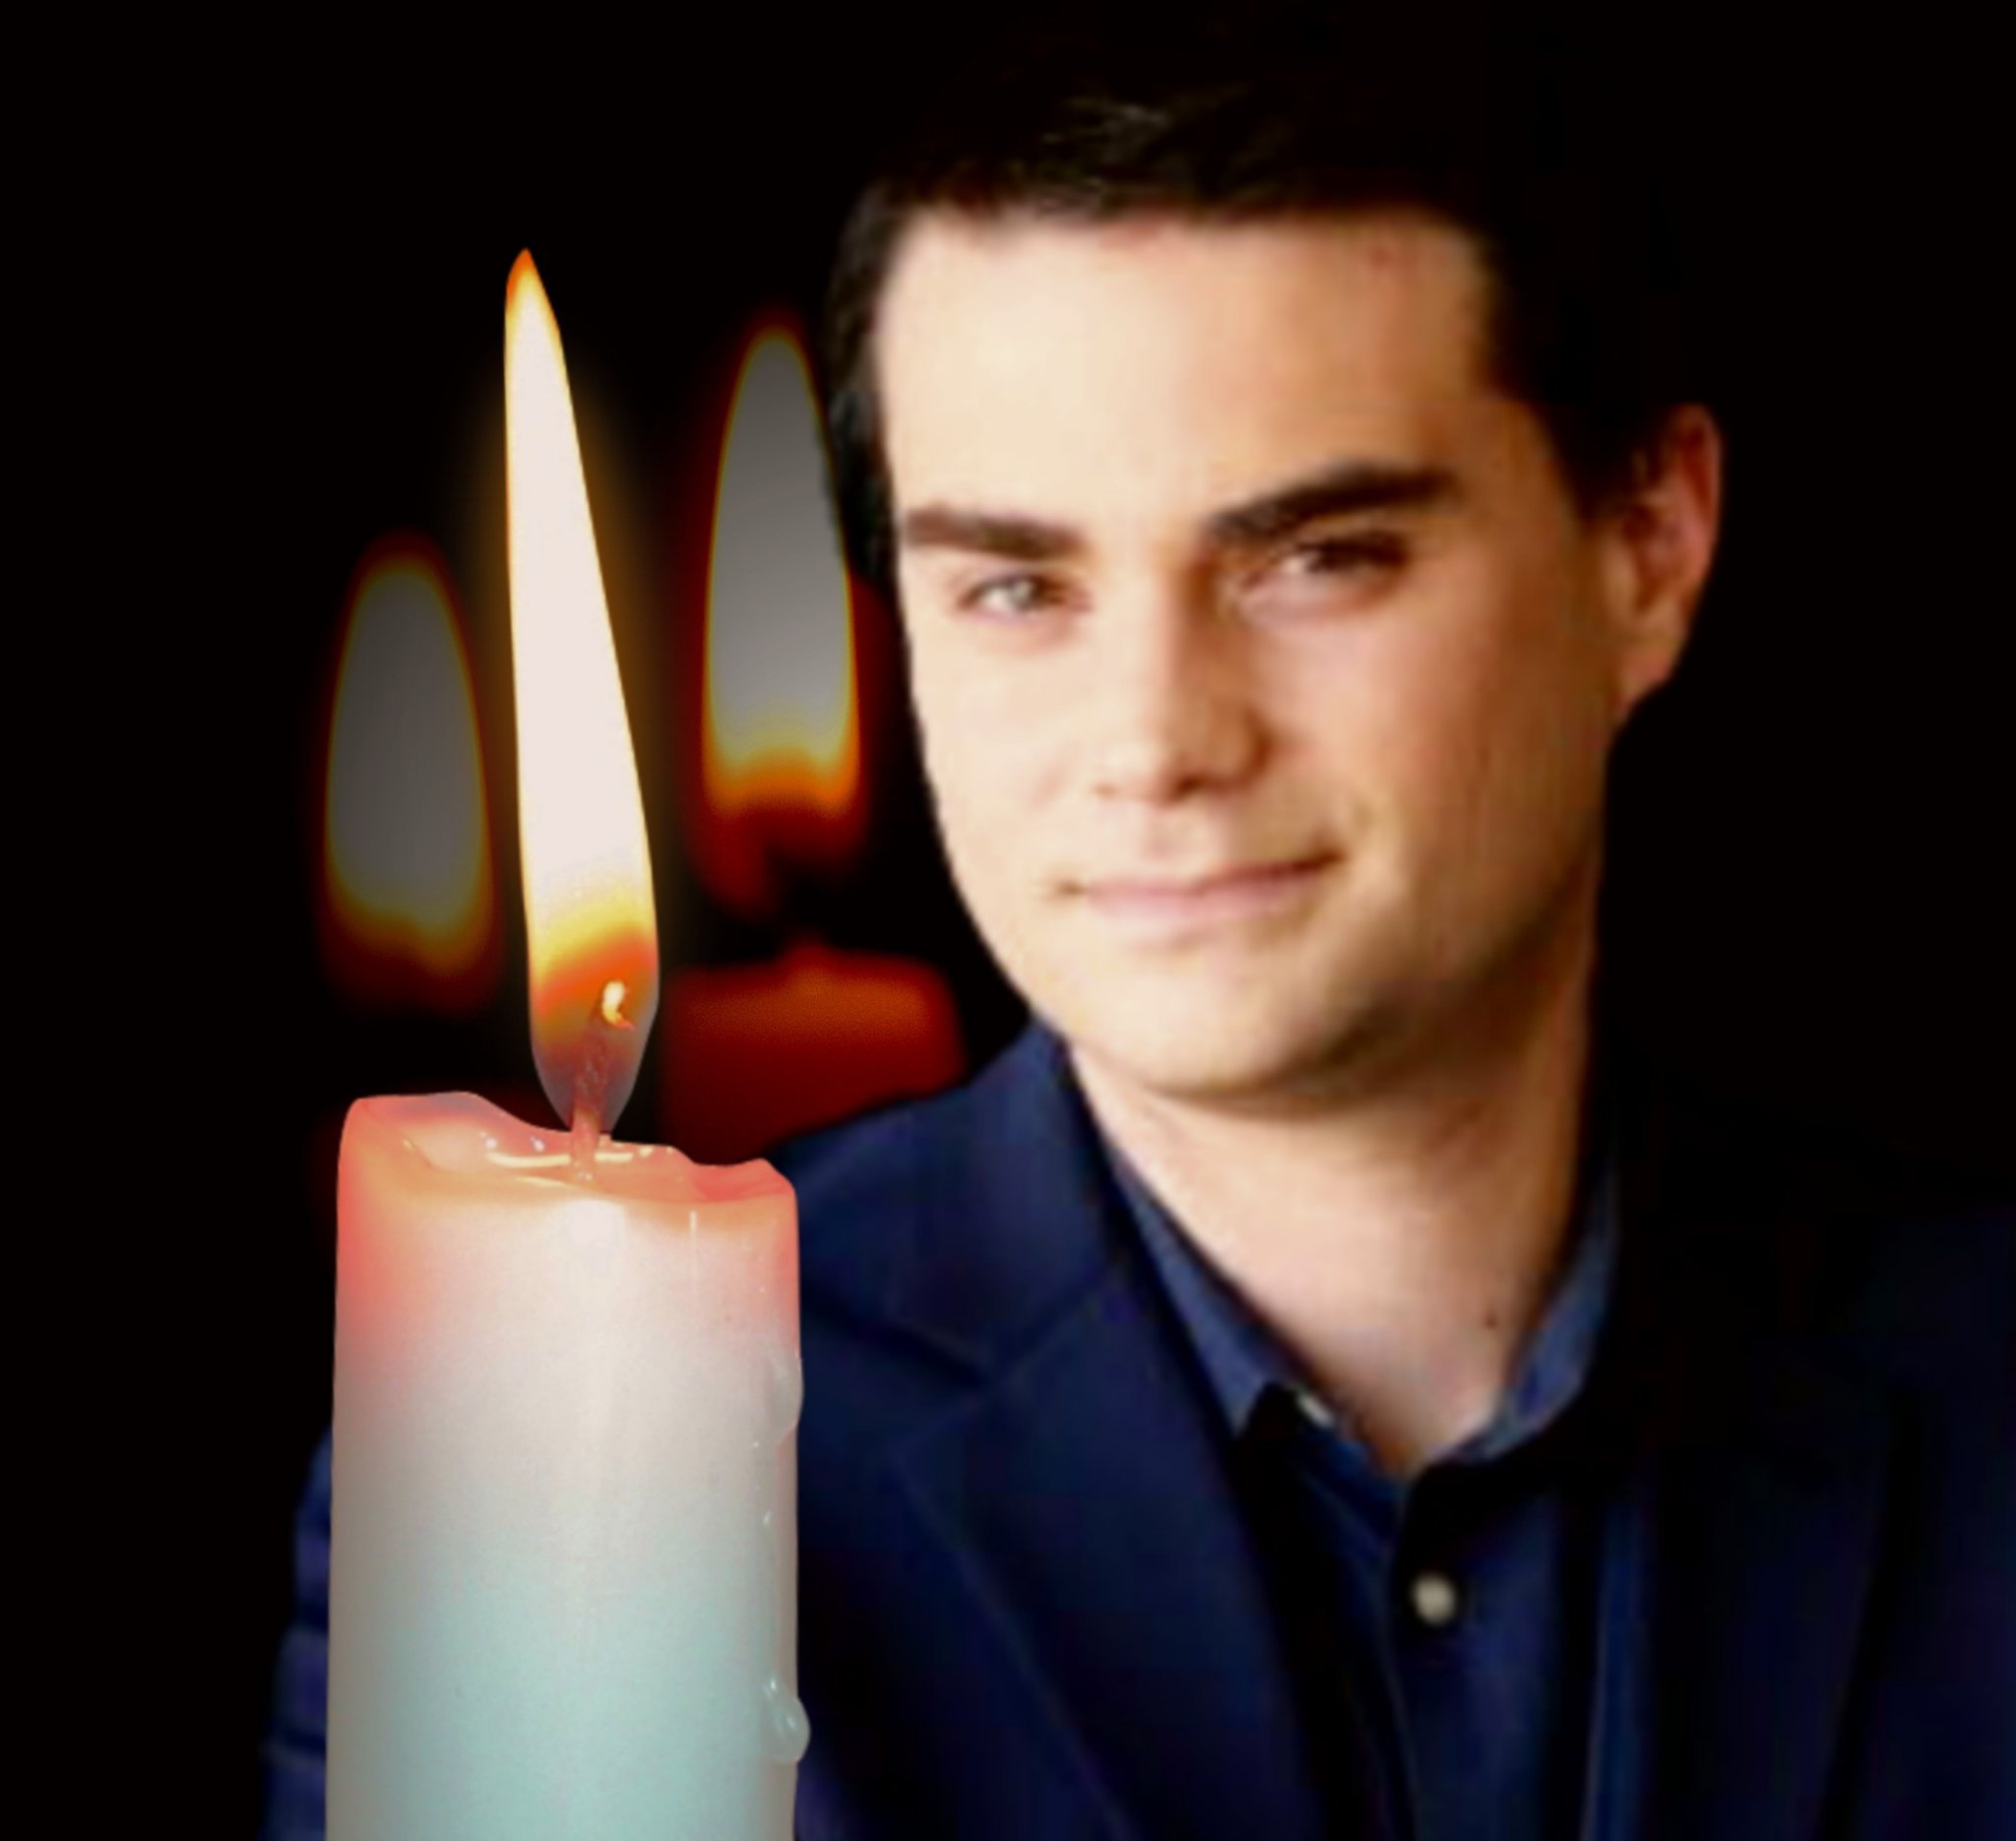 The Ben Shapiro Cult. Founded and lead by @kanranakurax2. Discord: https://t.co/6RC9oJjlpx

(Don't like cults? Check out @Shapiro_Teens) *fan account